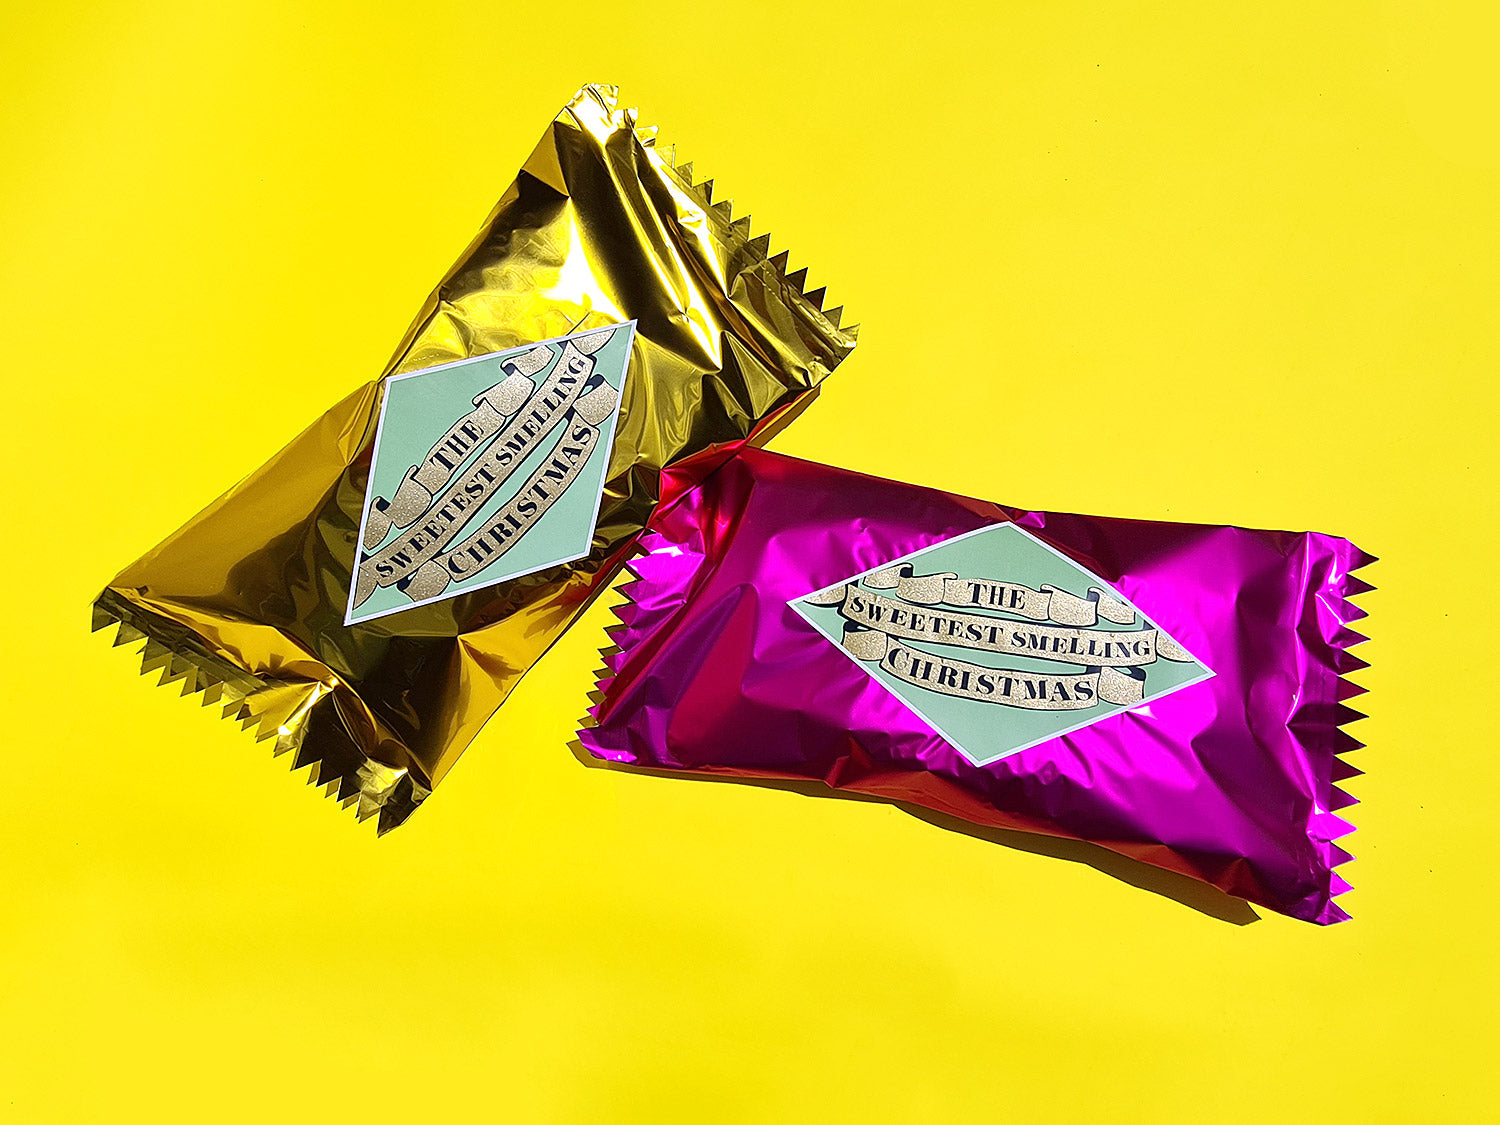 Two, giant wrapped candies in metallic pink and gold, with retro-style labels sit on a yellow background. 